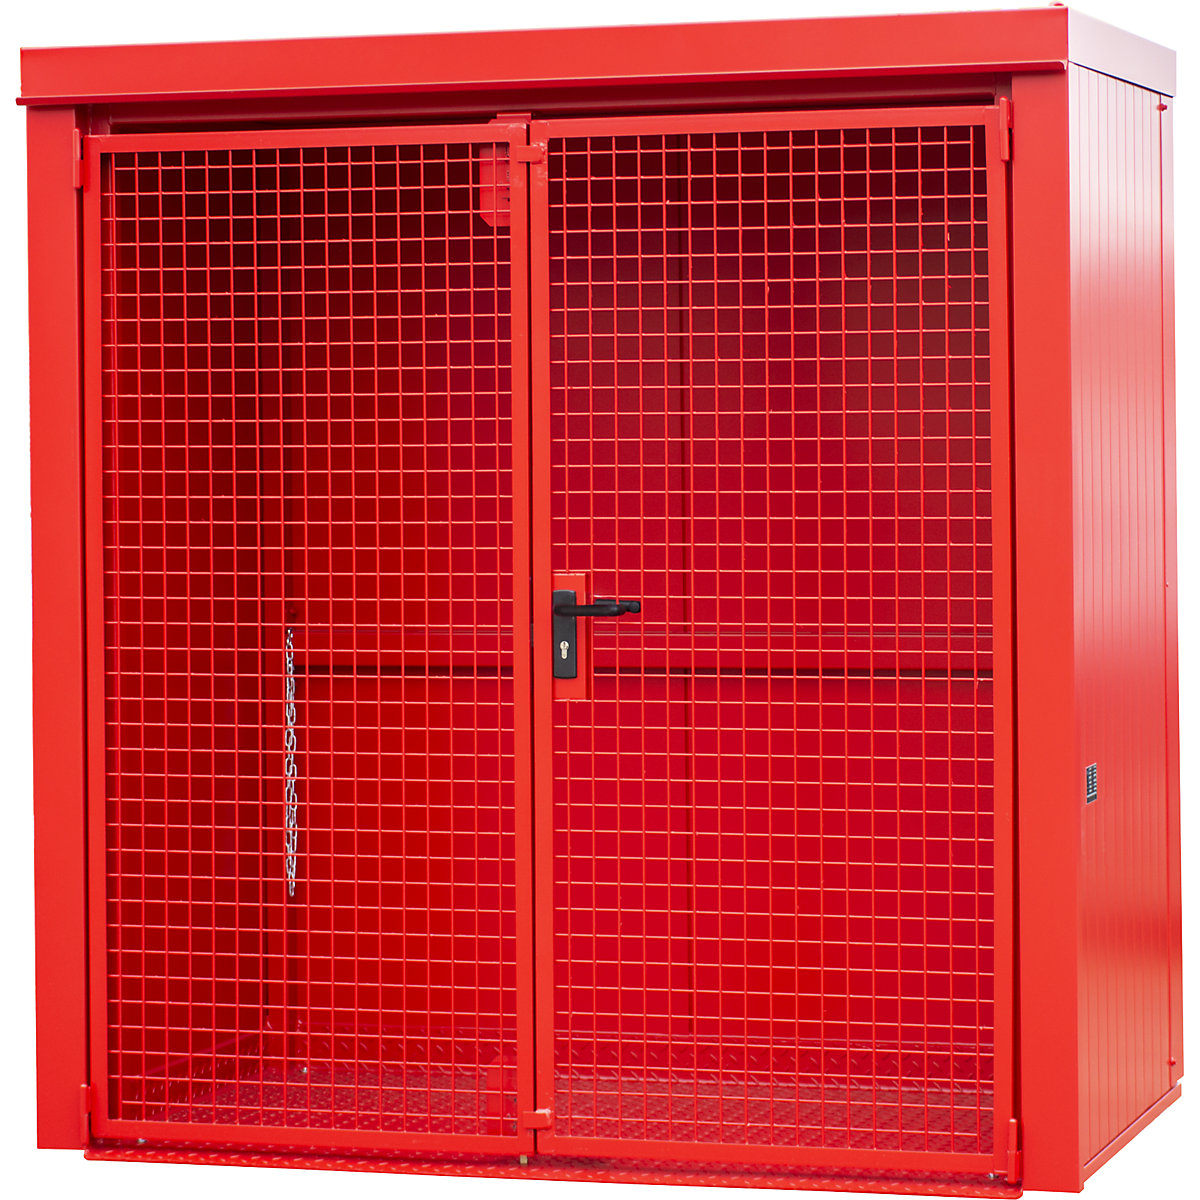 Gas cylinder container, fire resistant – eurokraft pro, for 28 cylinders with Ø 230 mm, red-4